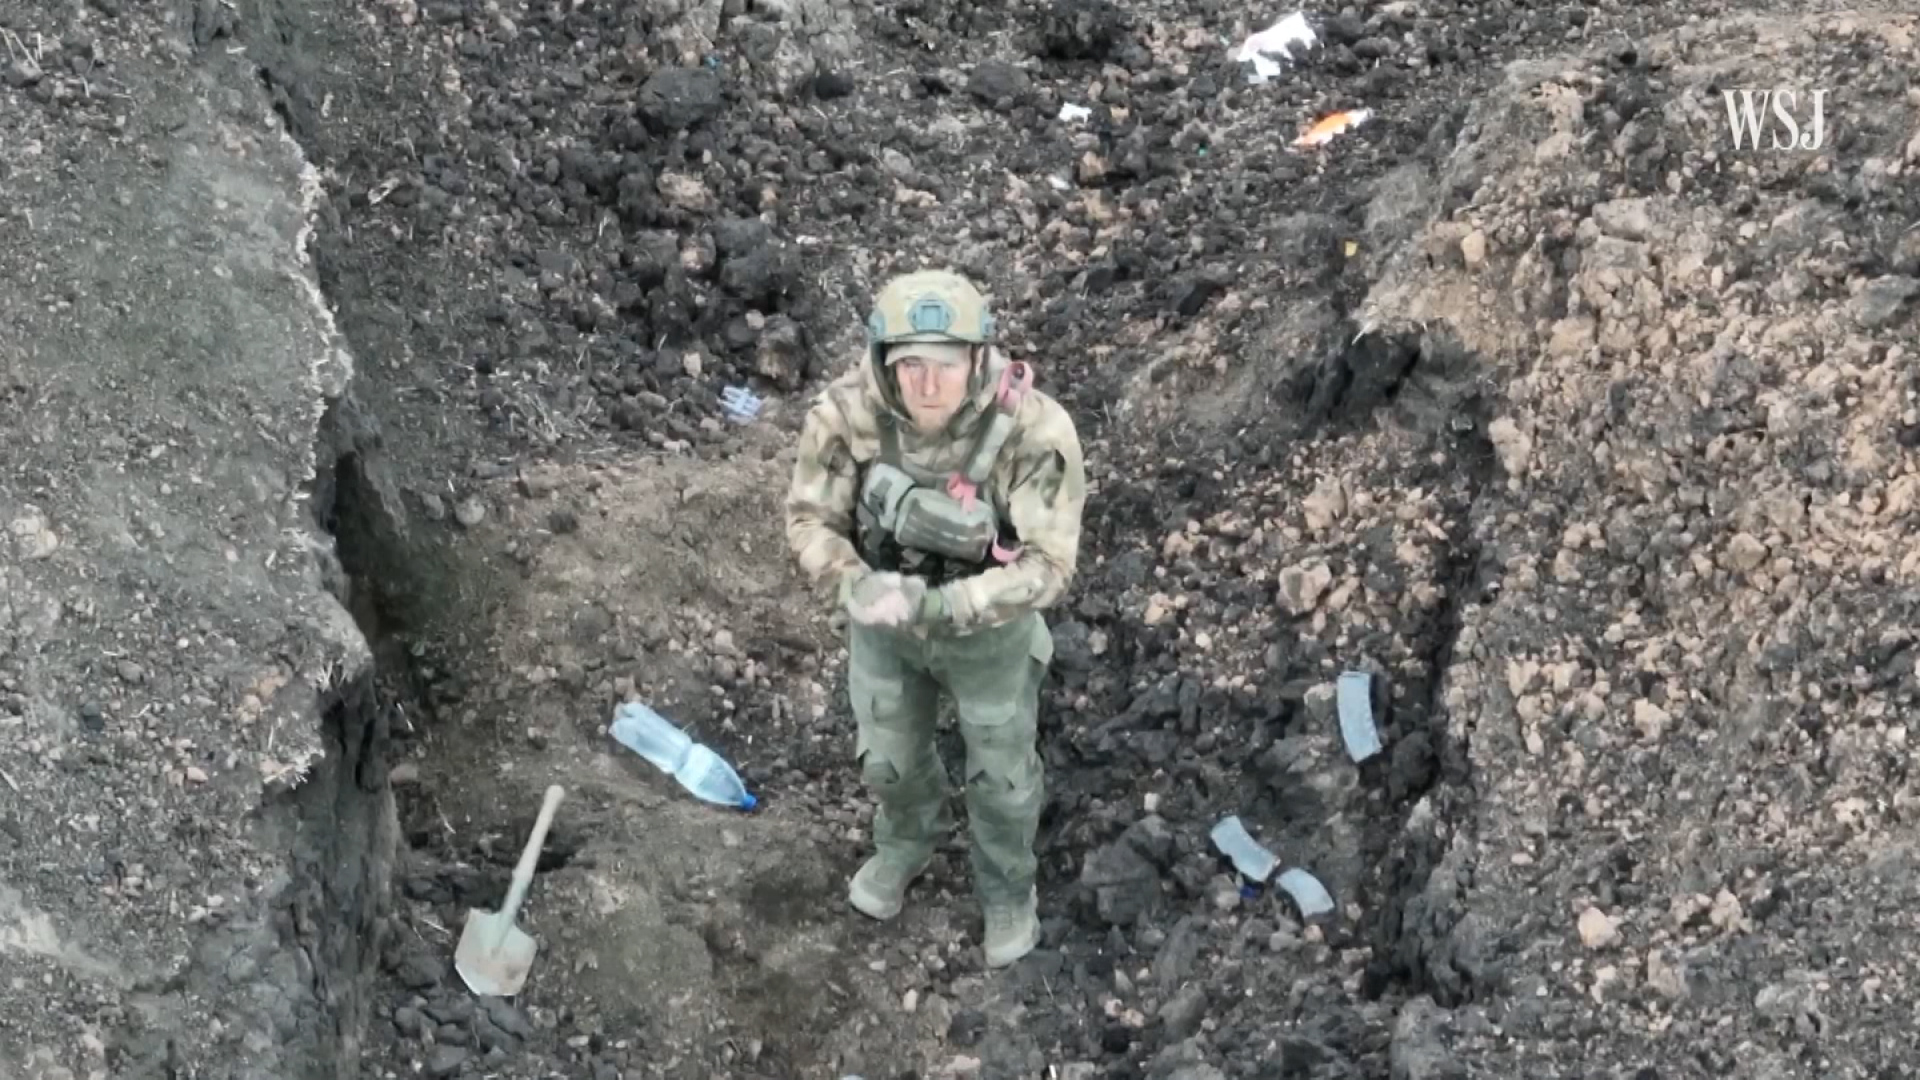 Drone footage obtained by The Wall Street Journal appears to show a Russian soldier surrendering to a Ukrainian drone on the battlefield of Bakhmut in May.